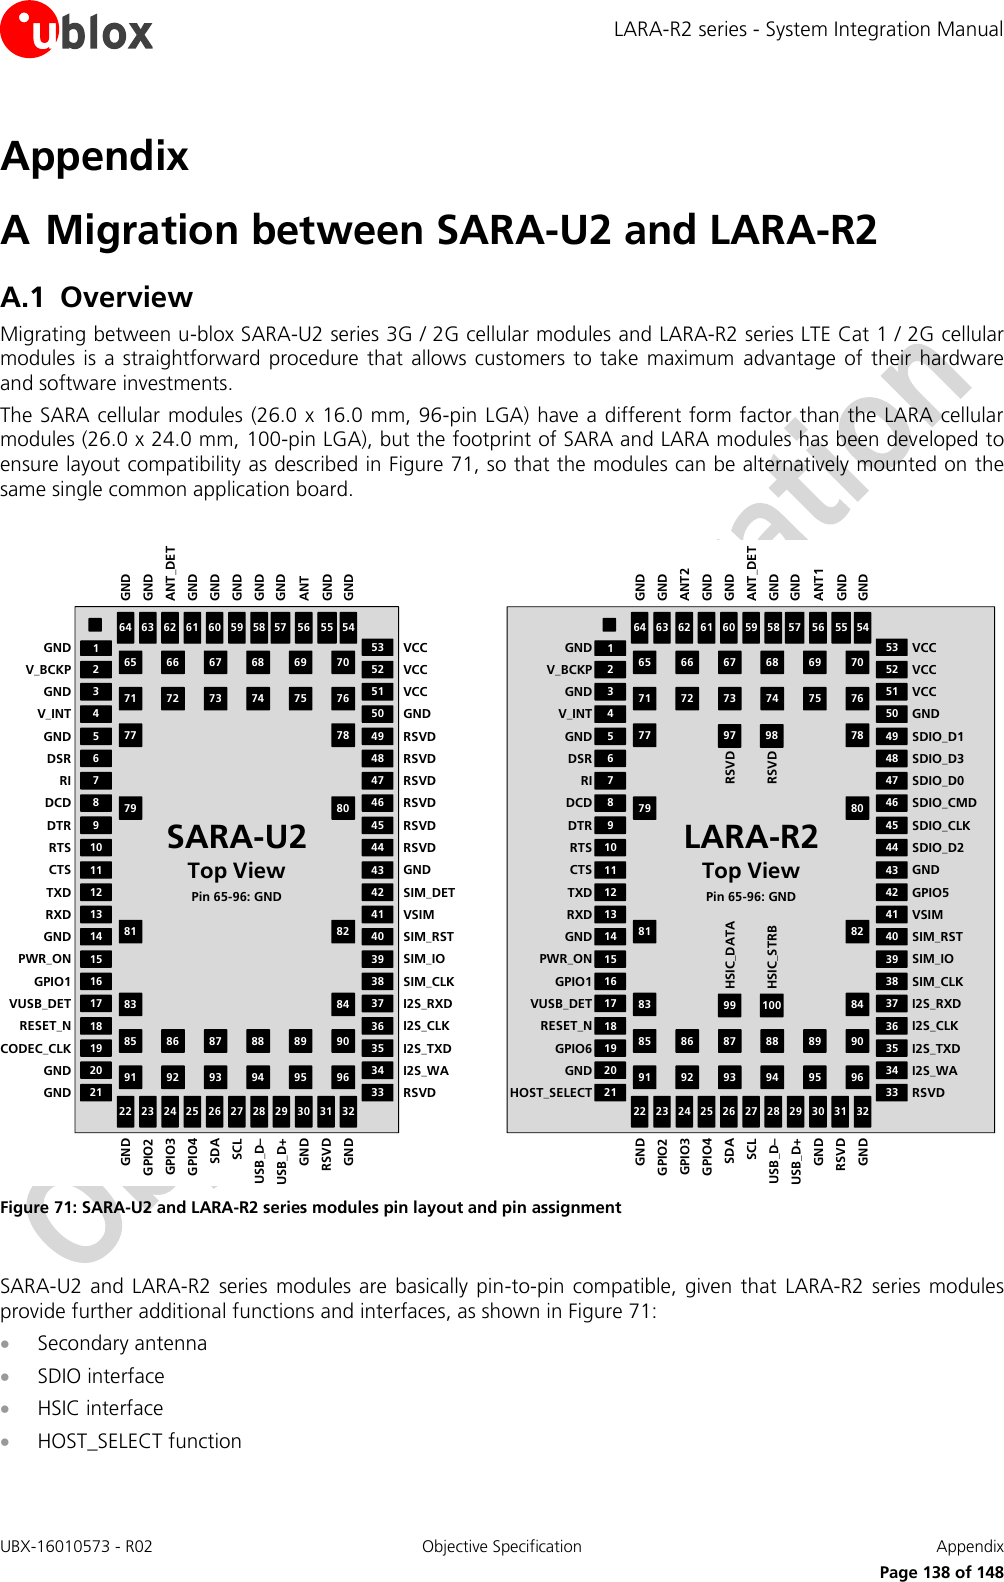 LARA-R2 series - System Integration Manual UBX-16010573 - R02  Objective Specification  Appendix      Page 138 of 148 Appendix A Migration between SARA-U2 and LARA-R2 A.1 Overview Migrating between u-blox SARA-U2 series 3G / 2G cellular modules and LARA-R2 series LTE Cat 1 / 2G cellular modules  is  a  straightforward  procedure  that  allows customers  to take  maximum  advantage  of their  hardware and software investments. The SARA cellular modules  (26.0 x 16.0 mm, 96-pin LGA) have a different form factor than the LARA cellular modules (26.0 x 24.0 mm, 100-pin LGA), but the footprint of SARA and LARA modules has been developed to ensure layout compatibility as described in Figure 71, so that the modules can be alternatively mounted on the same single common application board.  64 63 61 60 58 57 55 54225065 66 67 68 69 7071 72 73 74 75 7677 7879 8081 8283 8485 86 87 88 89 9091 92 93 94 95 96CTSRTSDCDRIV_INTV_BCKPGNDCODEC_CLKRESET_NGPIO1PWR_ONRXDTXD11108754212119181615131232017149623 25 26 28 29 31 3224 27 3043444647495253333536383941425148454037345962 56GNDGNDDSRDTRGNDVUSB_DETGNDUSB_D–USB_D+RSVDGNDGPIO2GPIO3SDASCLGPIO4GNDGNDGNDGNDVCCVCCRSVDI2S_TXDI2S_CLKSIM_CLKSIM_IOVSIMSIM_DETVCCSIM_RSTI2S_RXDI2S_WAGNDGNDGNDGNDGNDGNDGNDGNDGNDANT_DETANTSARA-U2Top ViewPin 65-96: GNDGNDRSVDRSVDRSVDRSVDRSVD RSVD64 63 61 60 58 57 55 54225065 66 67 68 69 7071 72 73 74 75 7677 7879 8081 8283 8485 86 87 88 89 9091 92 93 94 95 96CTSRTSDCDRIV_INTV_BCKPGNDGPIO6RESET_NGPIO1PWR_ONRXDTXD11108754212119181615131232017149623 25 26 28 29 31 3224 27 3043444647495253333536383941425148454037345962 56GNDGNDDSRDTRGNDVUSB_DETGNDUSB_D–USB_D+RSVDGNDGPIO2GPIO3SDASCLGPIO4GNDGNDGNDGNDVCCVCCRSVDI2S_TXDI2S_CLKSIM_CLKSIM_IOVSIMGPIO5VCCSIM_RSTI2S_RXDI2S_WAGNDGNDGNDGNDGNDGNDGNDGNDANT_DETANT2ANT1LARA-R2Top ViewPin 65-96: GND99 10097 98RSVDRSVDHSIC_STRBHSIC_DATAHOST_SELECTSDIO_D2SDIO_CMDSDIO_D0SDIO_D1SDIO_D3SDIO_CLK Figure 71: SARA-U2 and LARA-R2 series modules pin layout and pin assignment  SARA-U2  and LARA-R2 series  modules are  basically  pin-to-pin compatible,  given  that  LARA-R2  series  modules provide further additional functions and interfaces, as shown in Figure 71:  Secondary antenna  SDIO interface  HSIC interface  HOST_SELECT function  